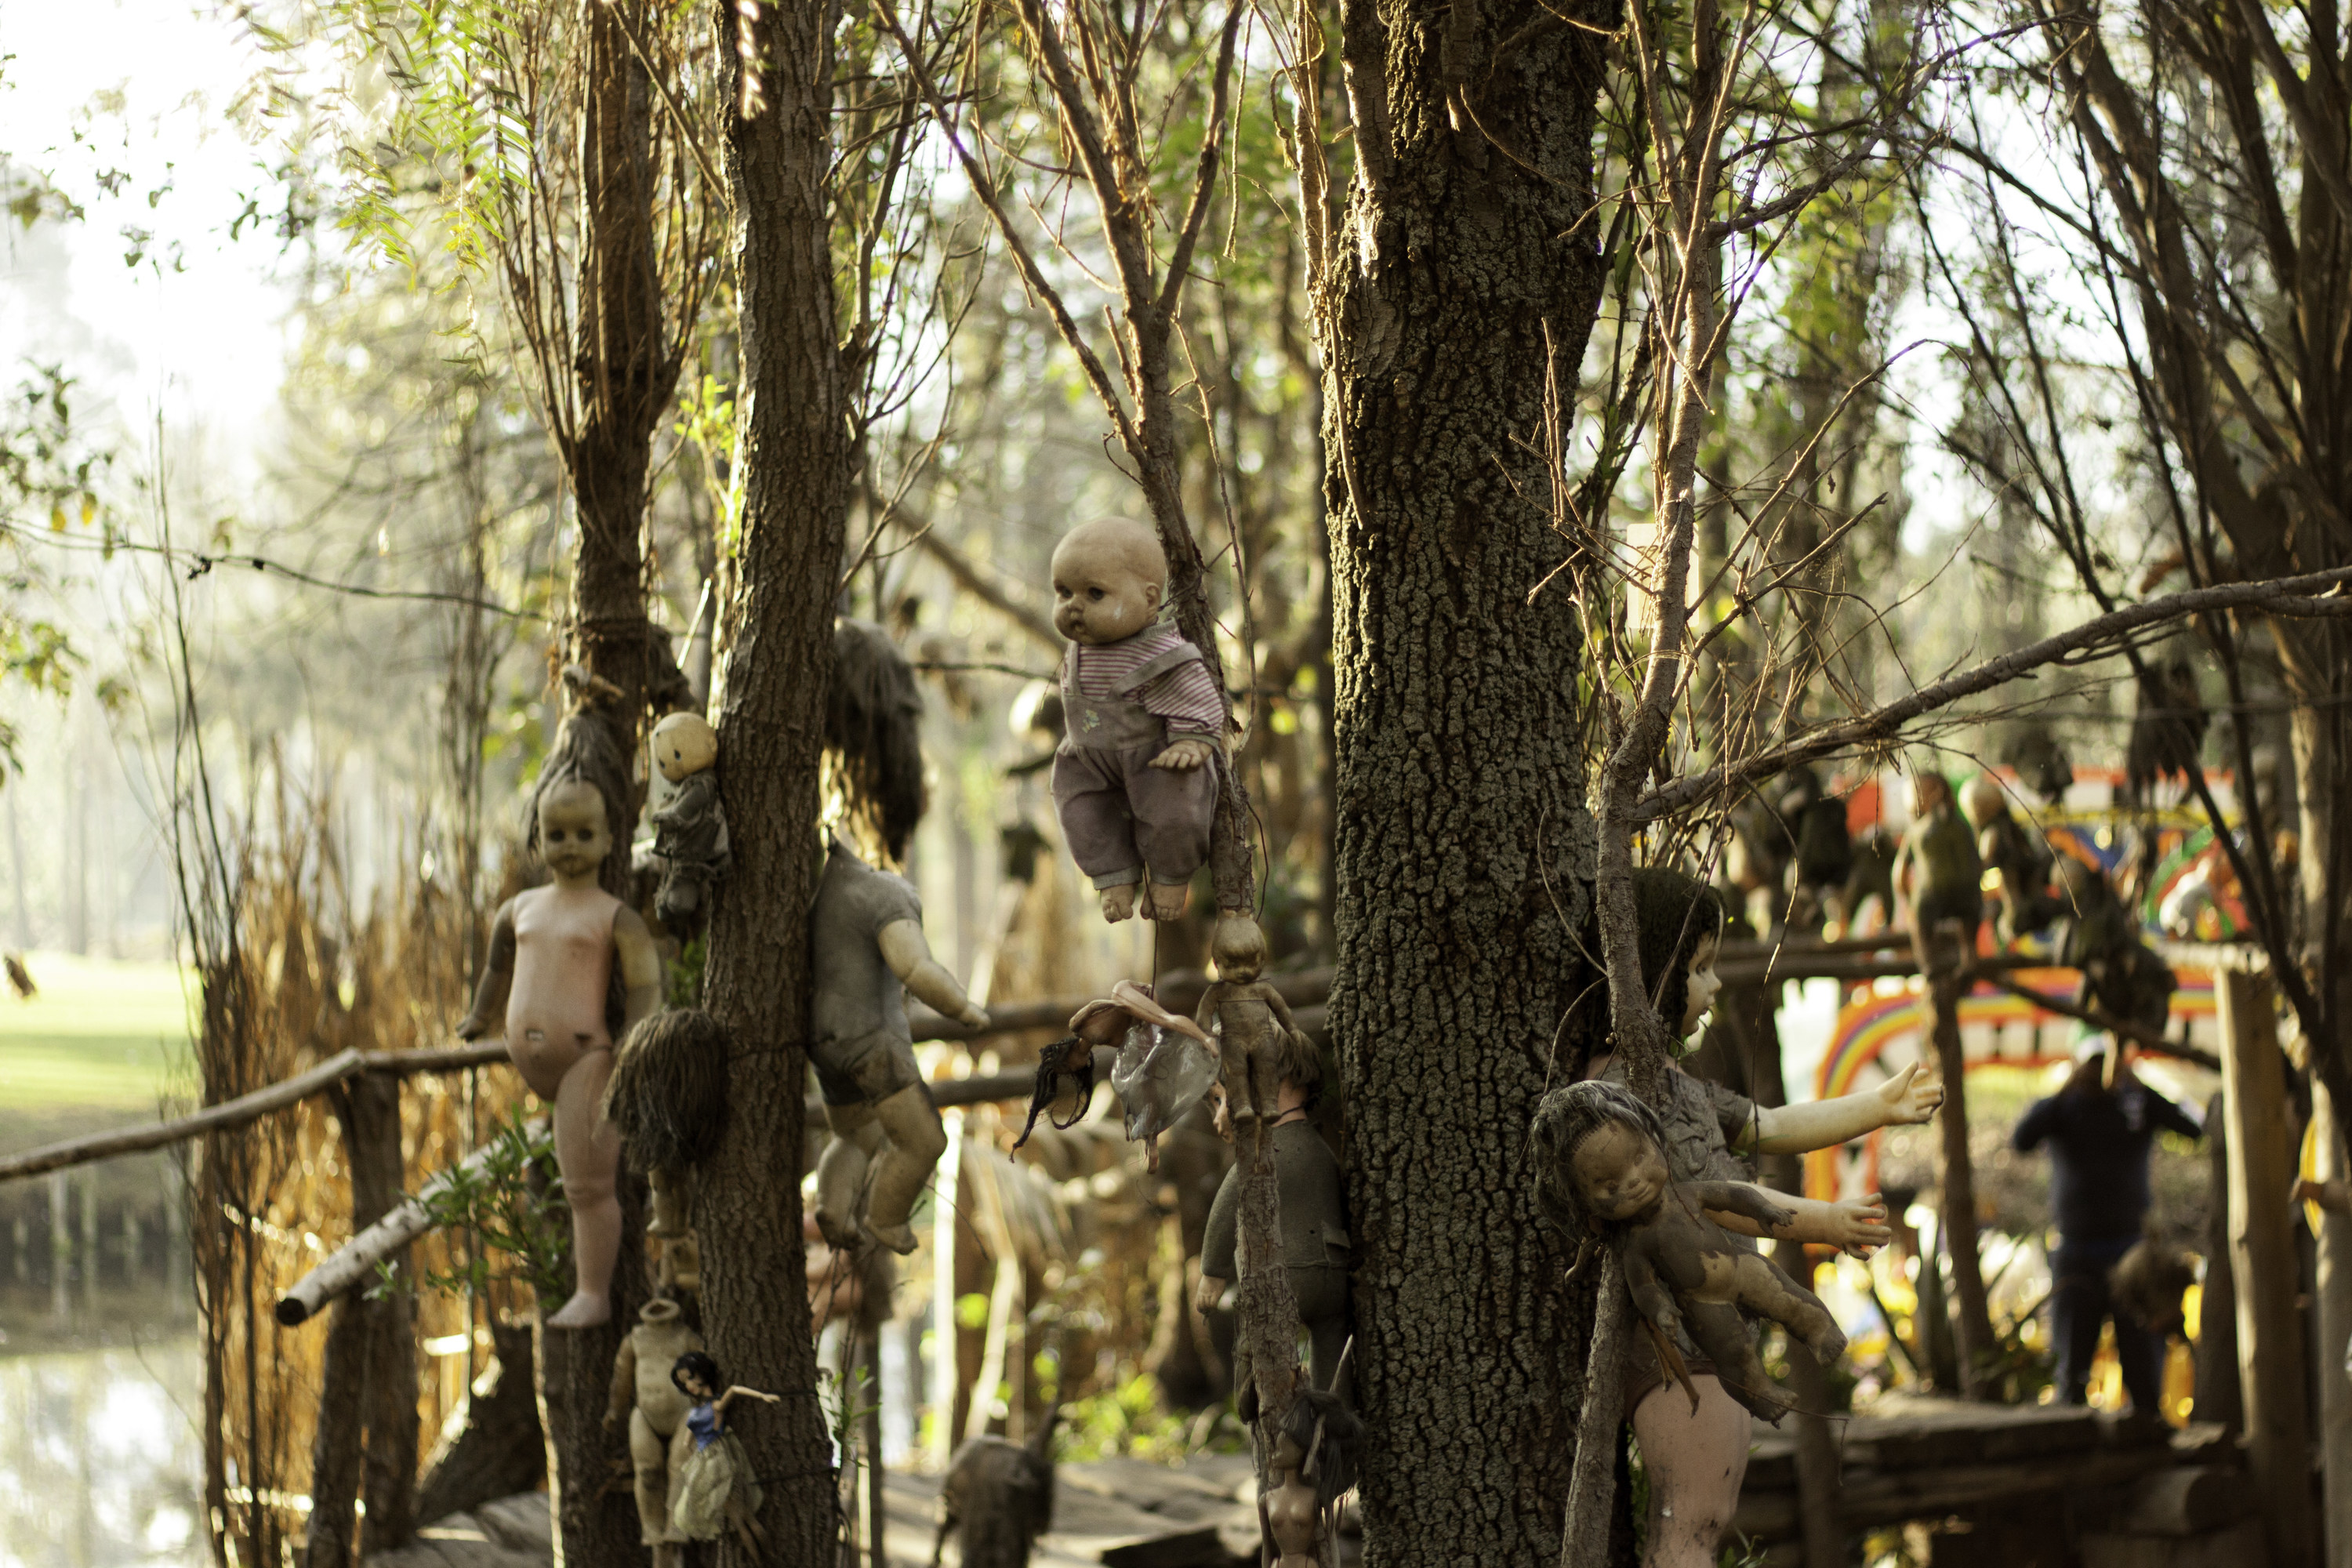 Dolls hanging from trees on the Island of Dolls